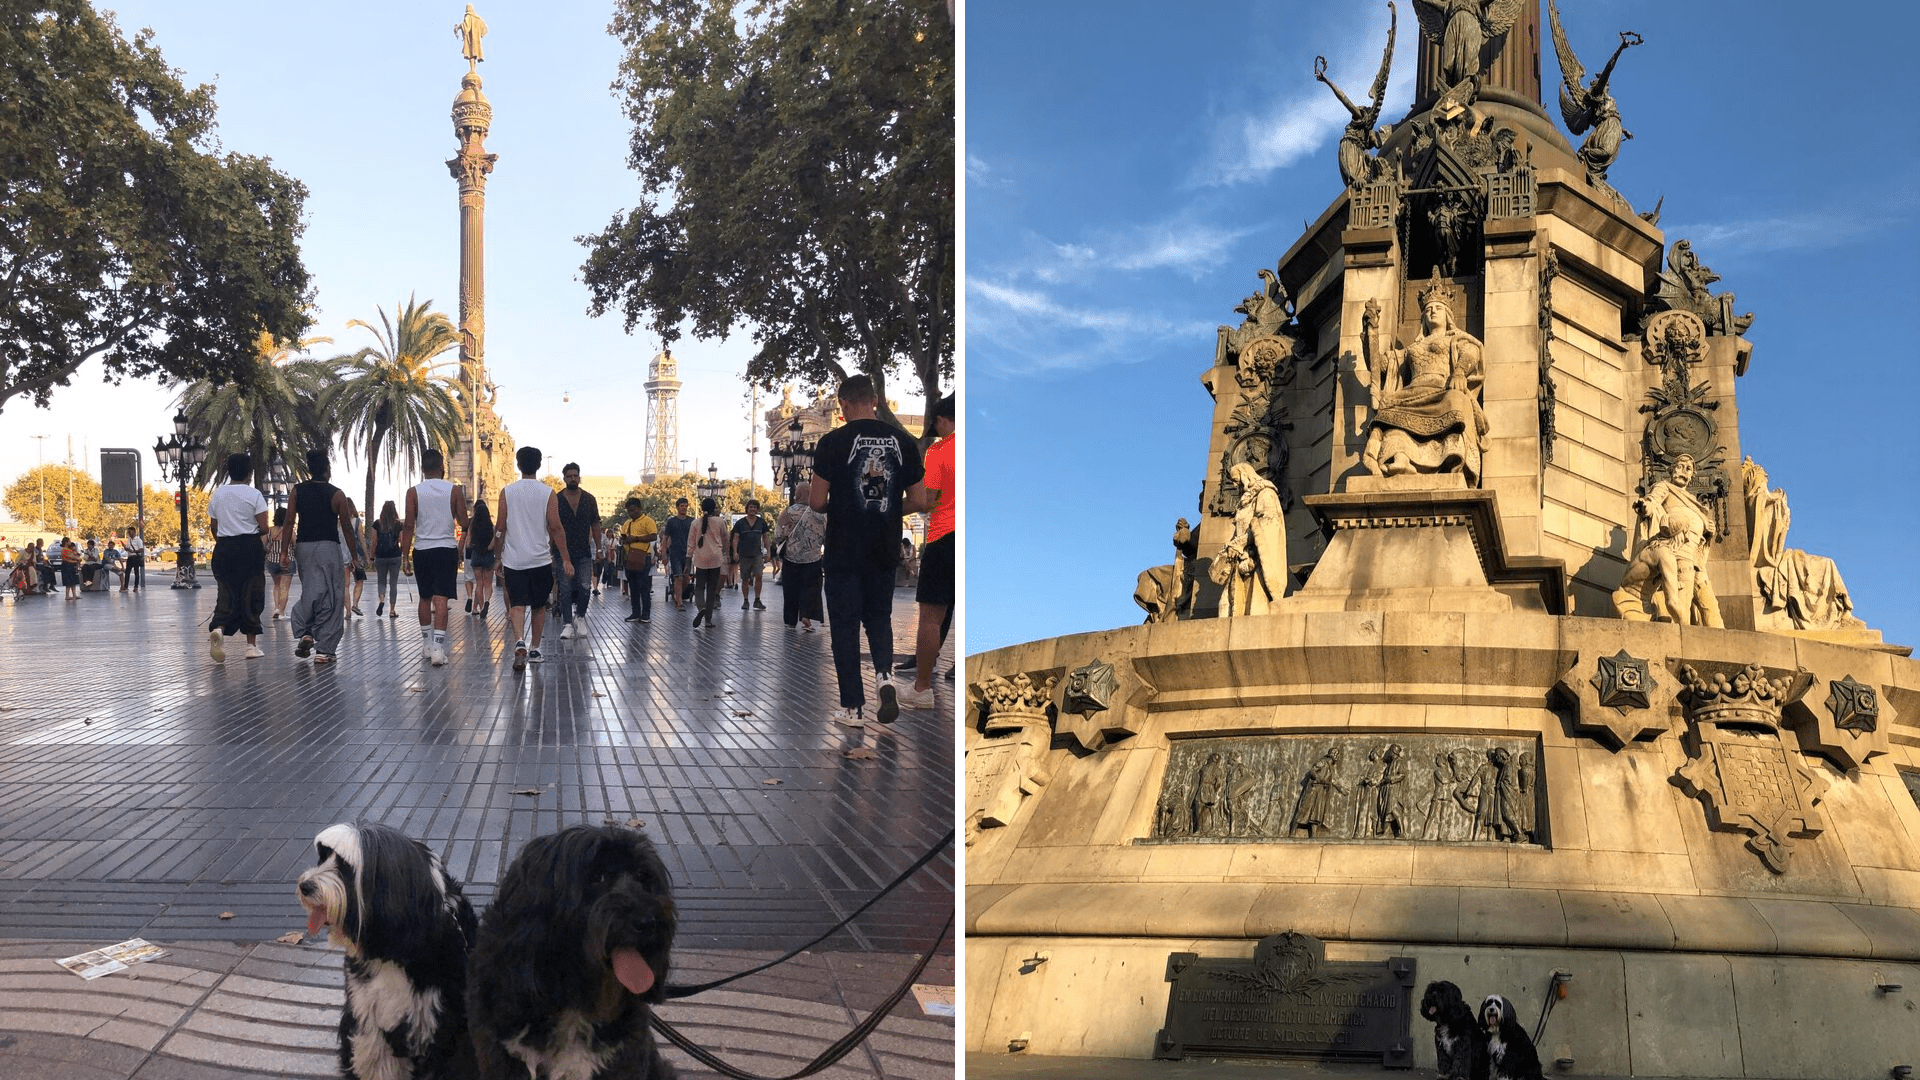 The dogs in Barcelona